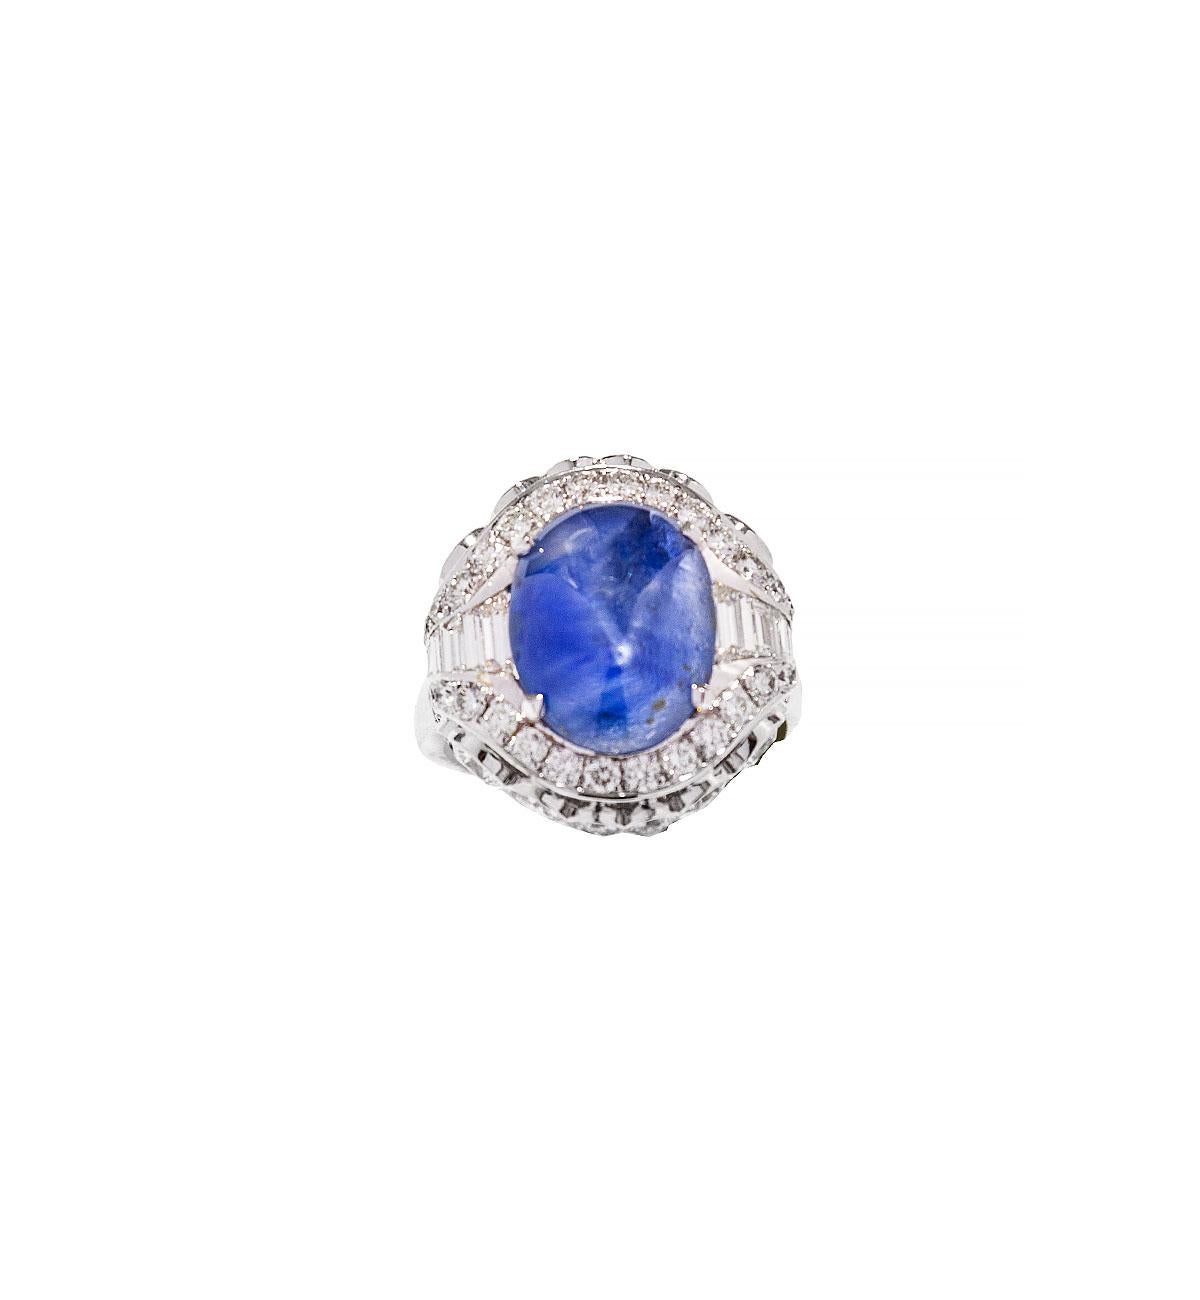 10.09 Ct's Unheat Ceylon Star Sapphire Cocktail Ring with Diamonds In New Condition For Sale In Istanbul, TR